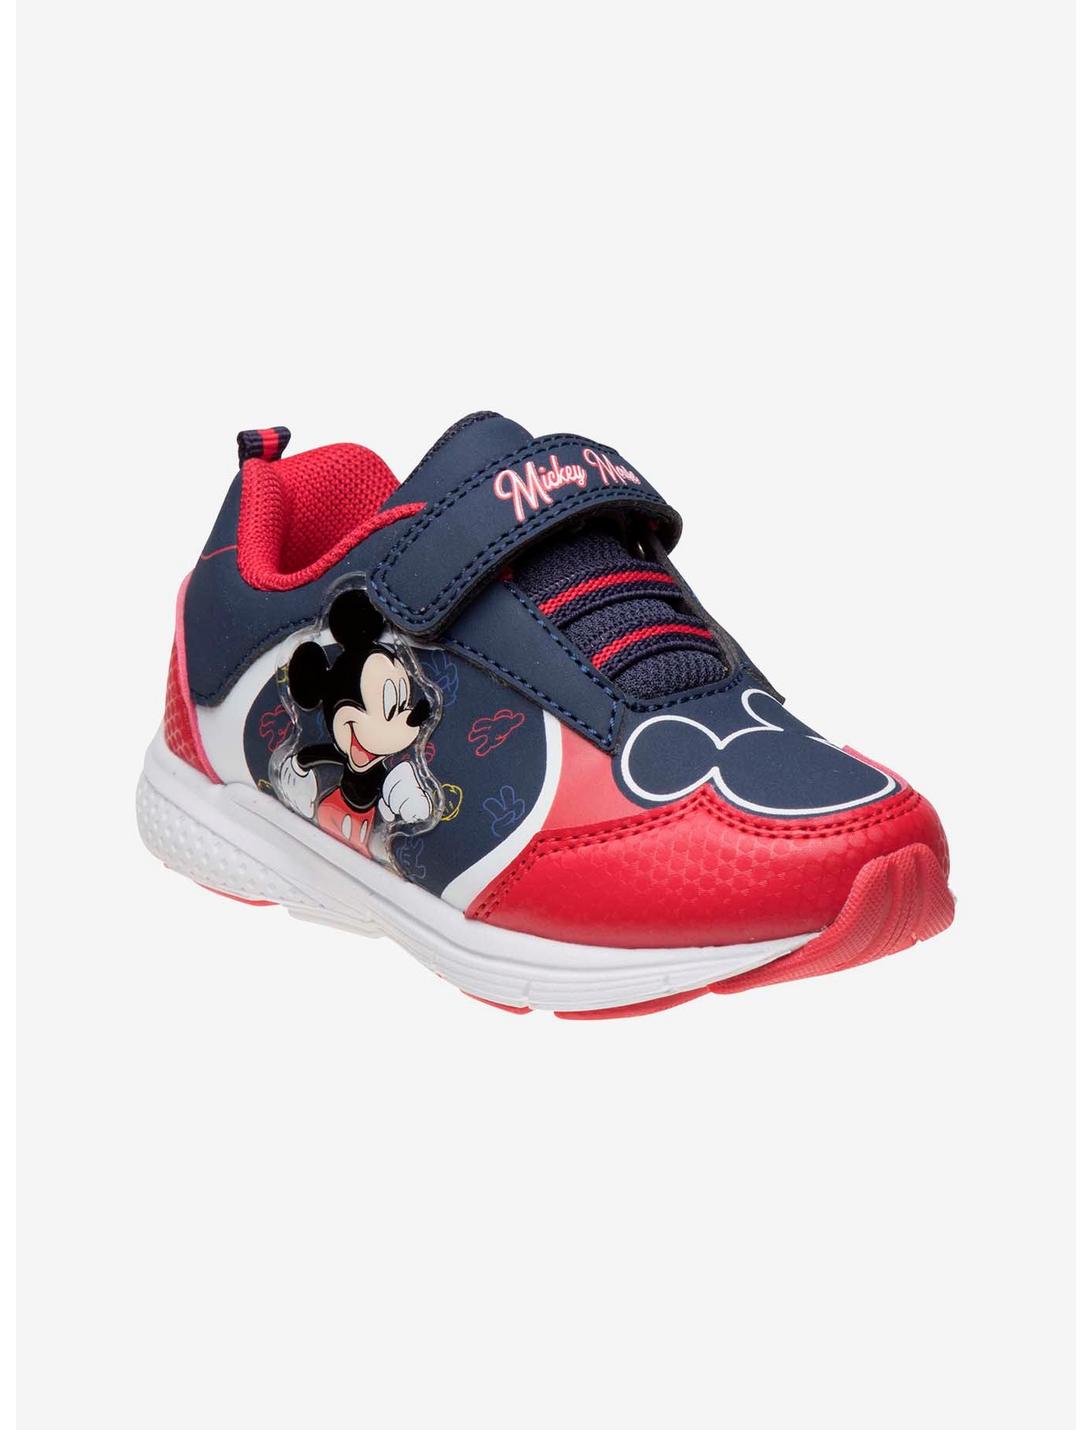 Disney Mickey Mouse Boys Lights Sneakers, BLUE, hi-res